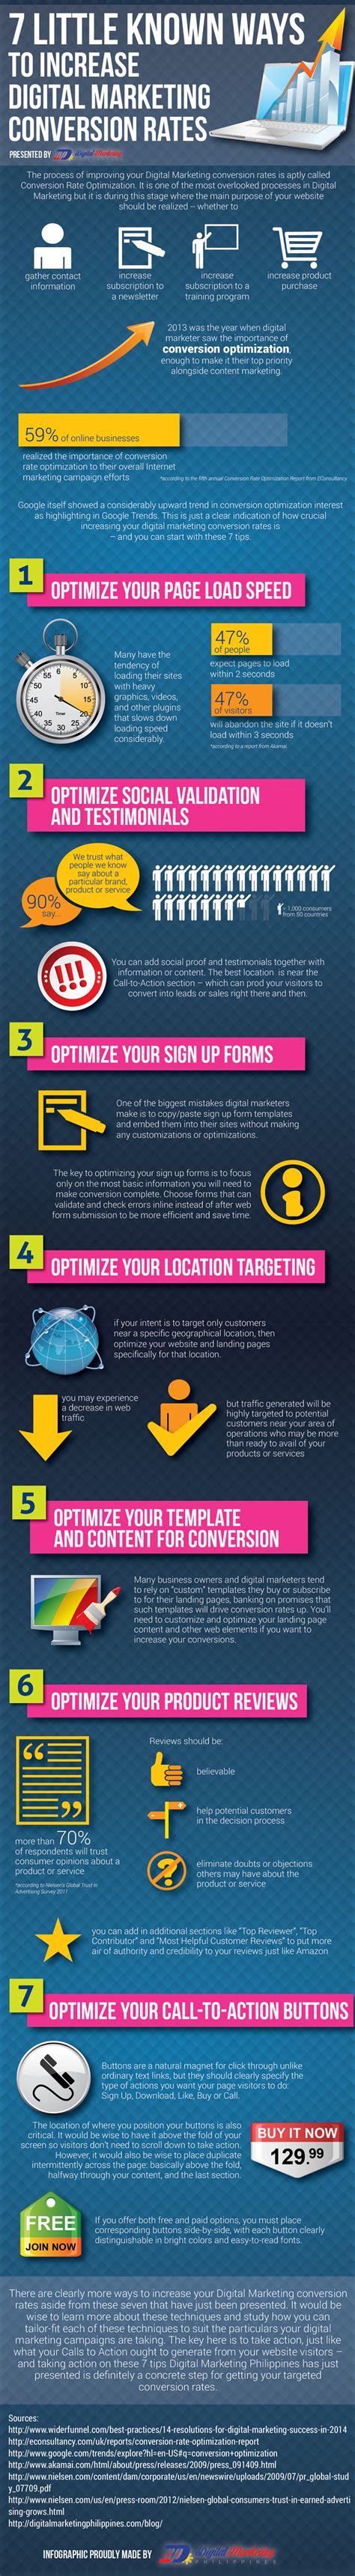 7 Little Known Ways To Increase Digital Marketing Conversion Rates Infographic